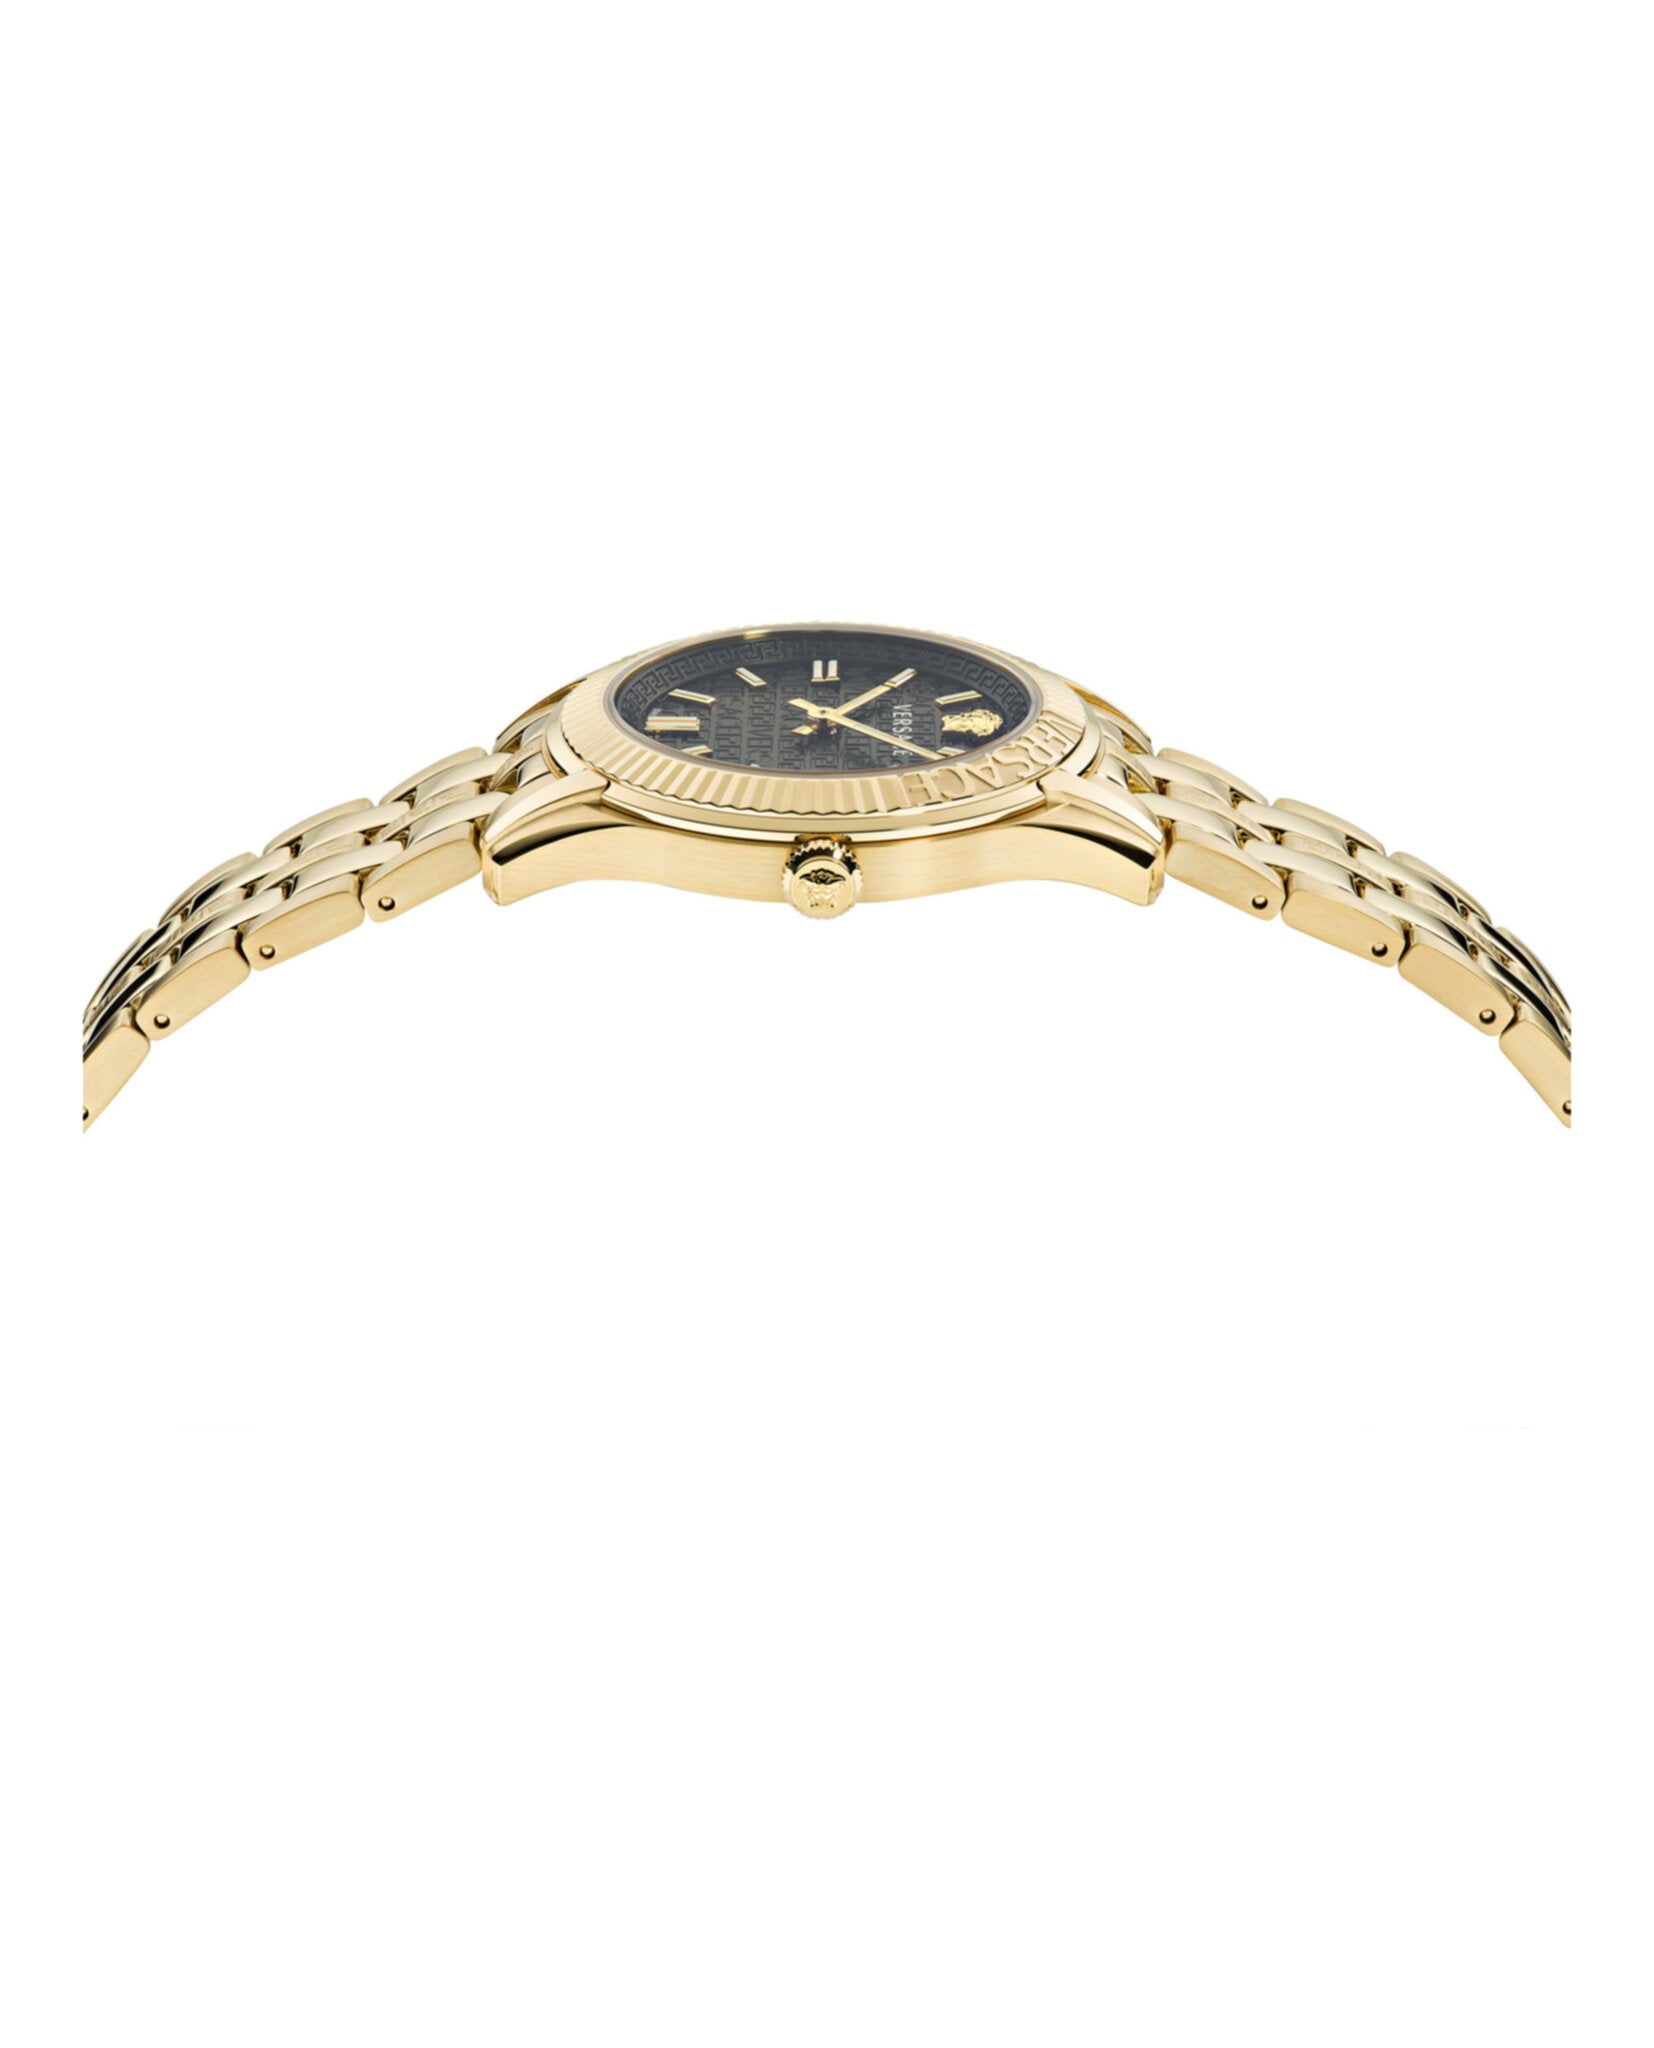 Versace Womens Greca Time Watches | MadaLuxe Time – Madaluxe Time